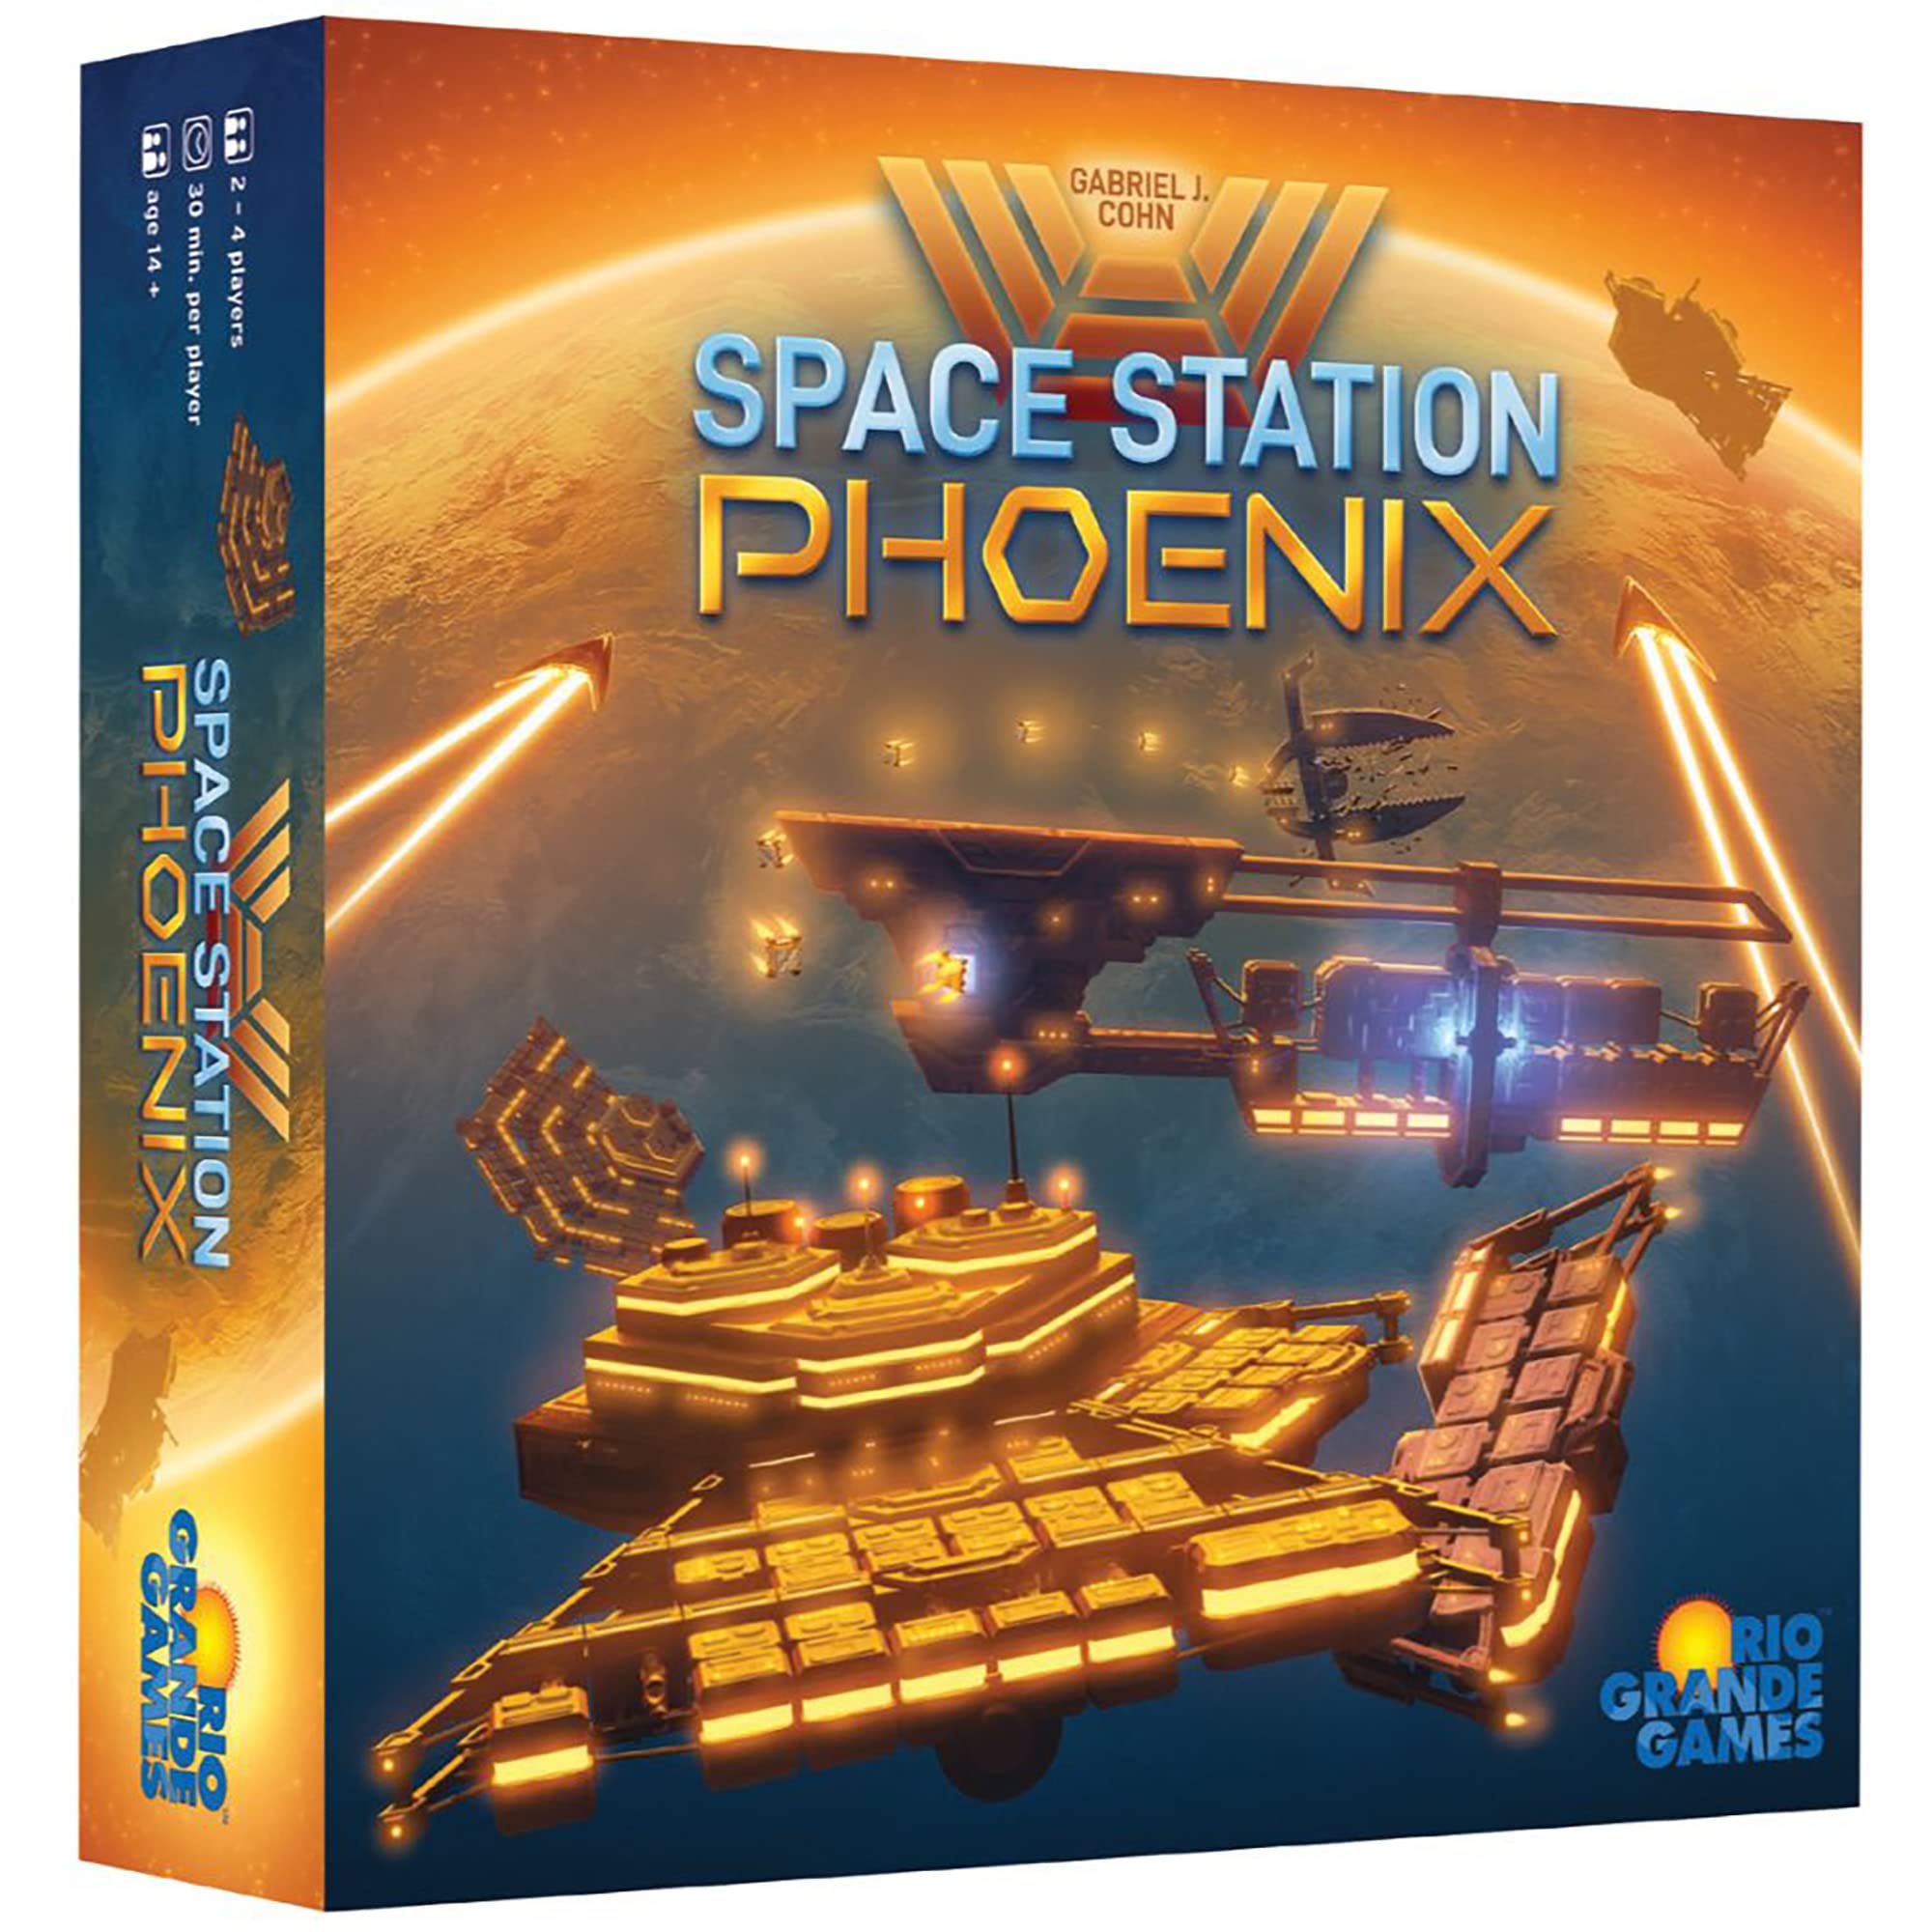 Rio Grande Games Space Station Phoenix - RIO Grande Games - Strategy Board Game, Ages 14+, 2-4 Players, 90-120 Min